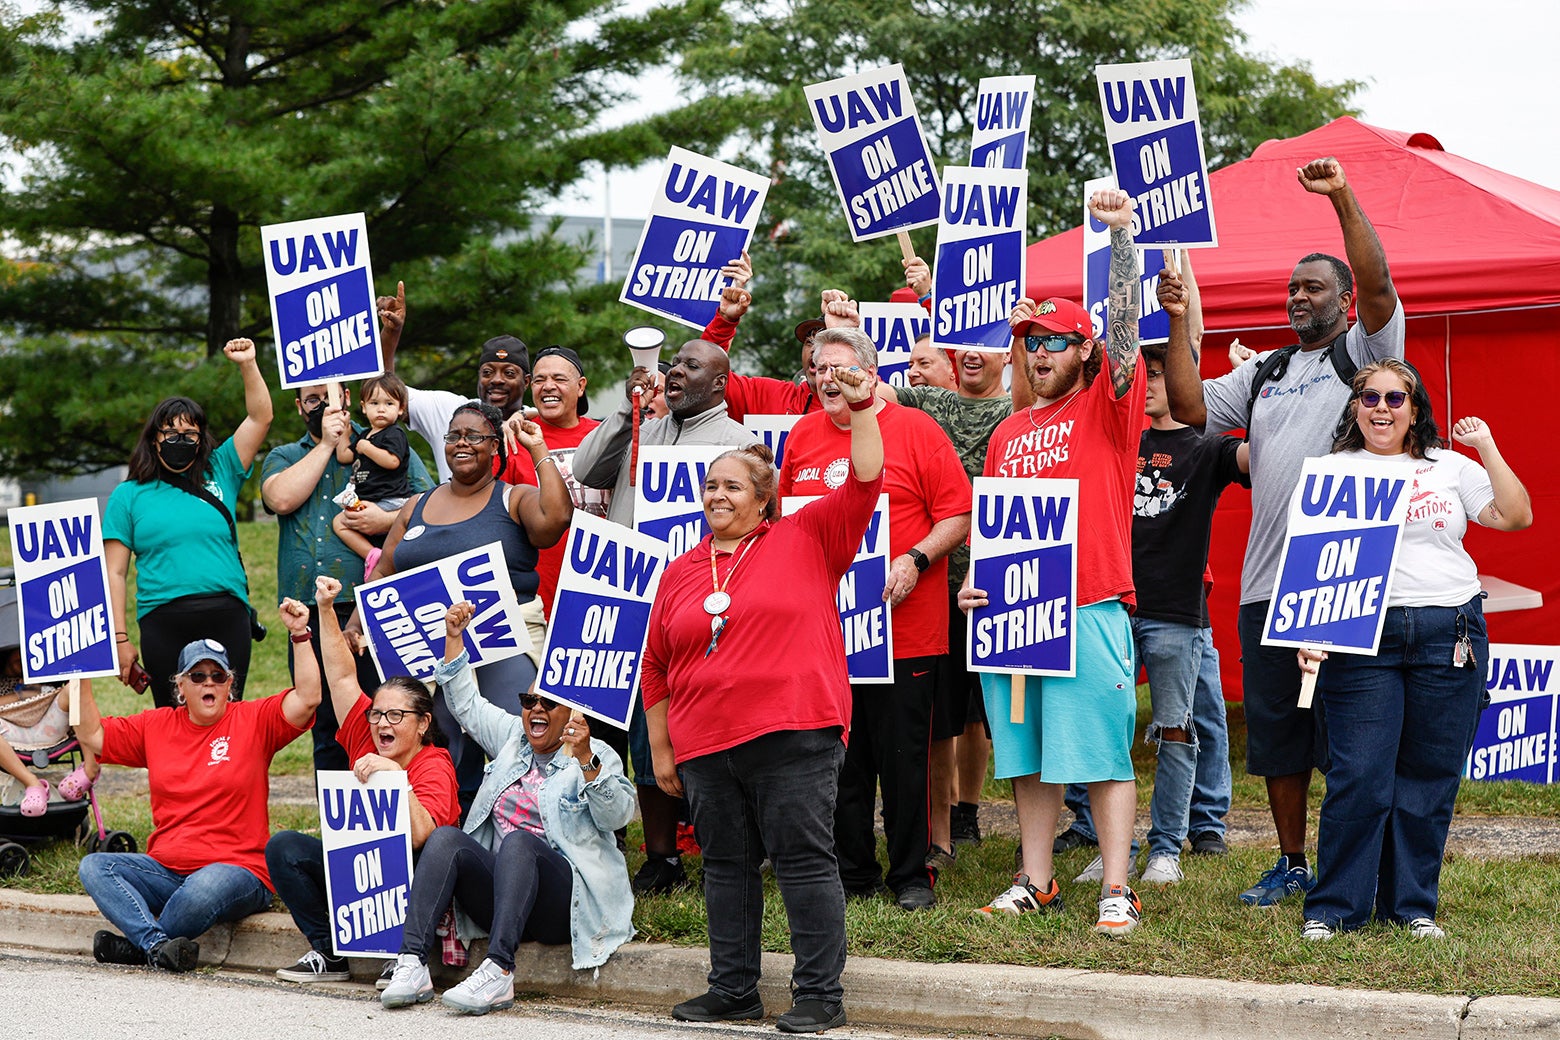 People hold up signs that say, "UAW on strike."